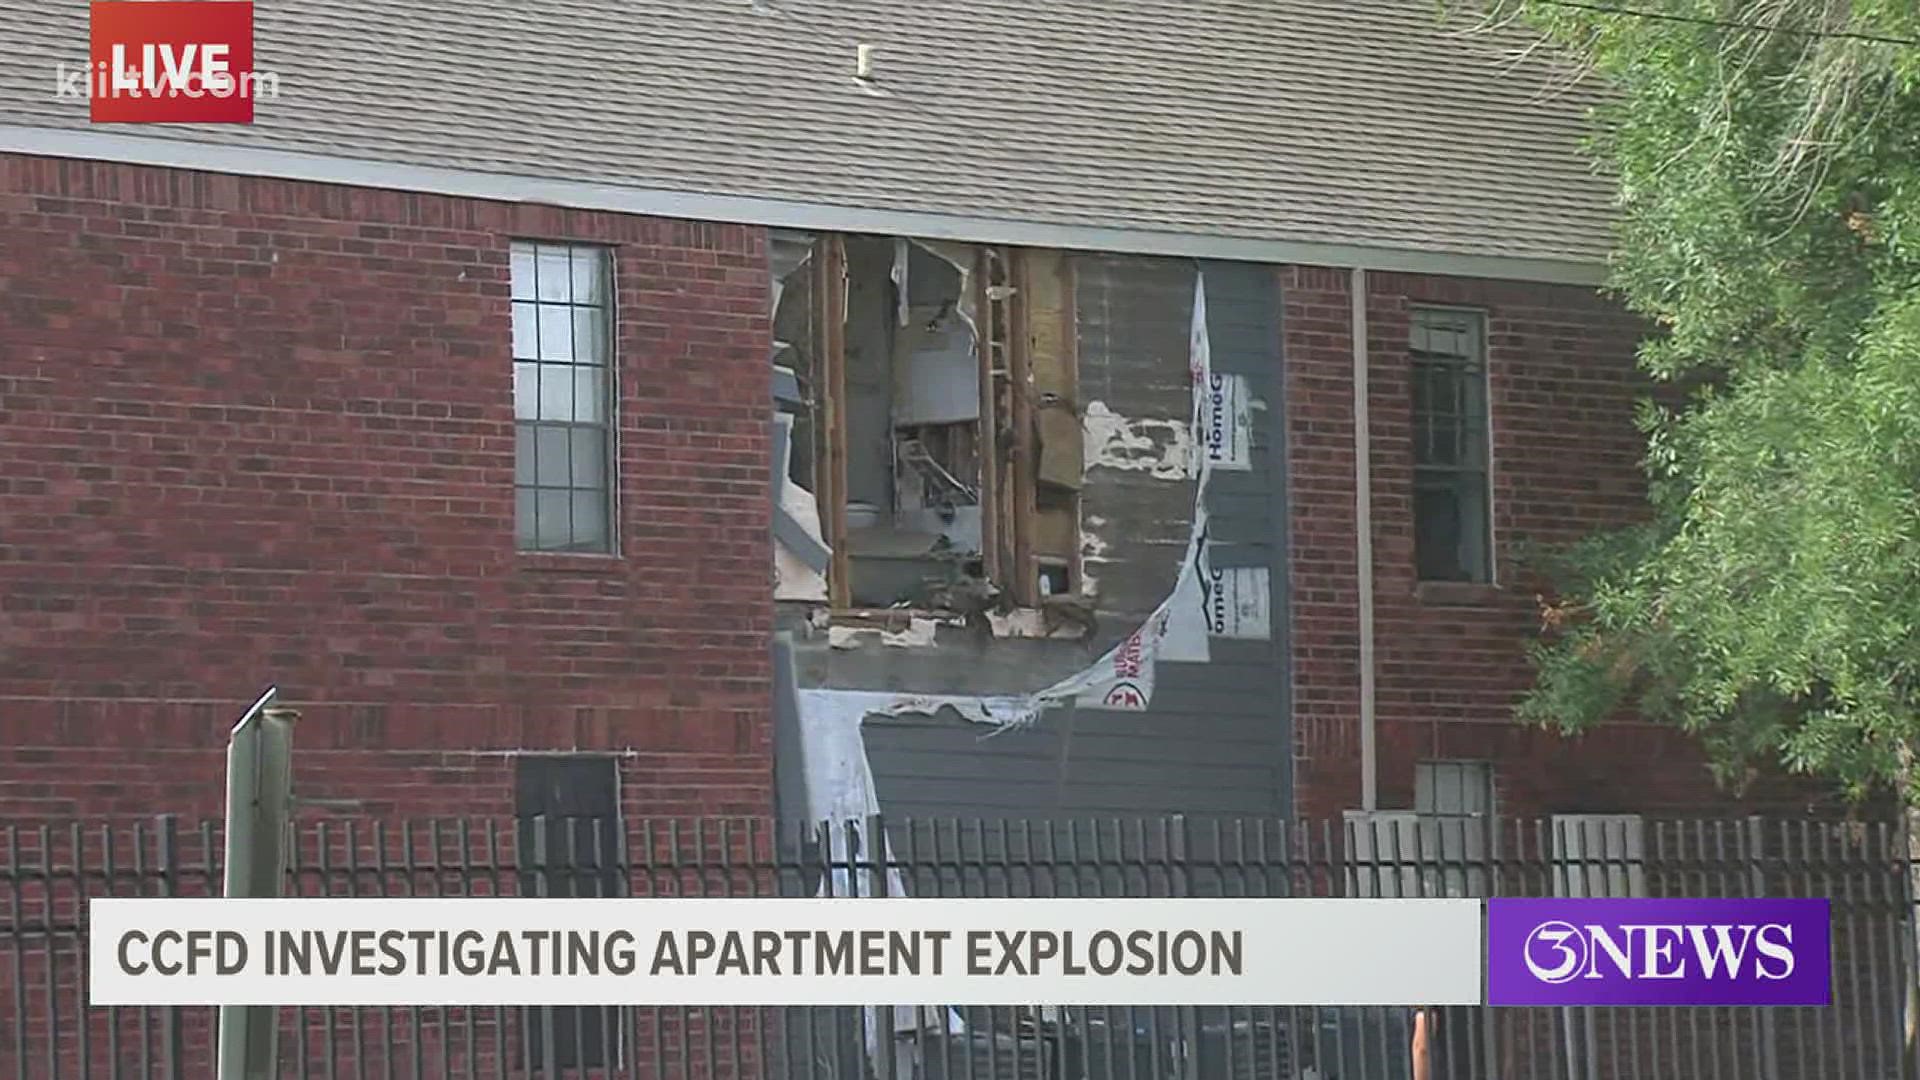 Officials said a contractor was working in the apartment at the time of the explosion, and that it was a chemical explosion in nature.